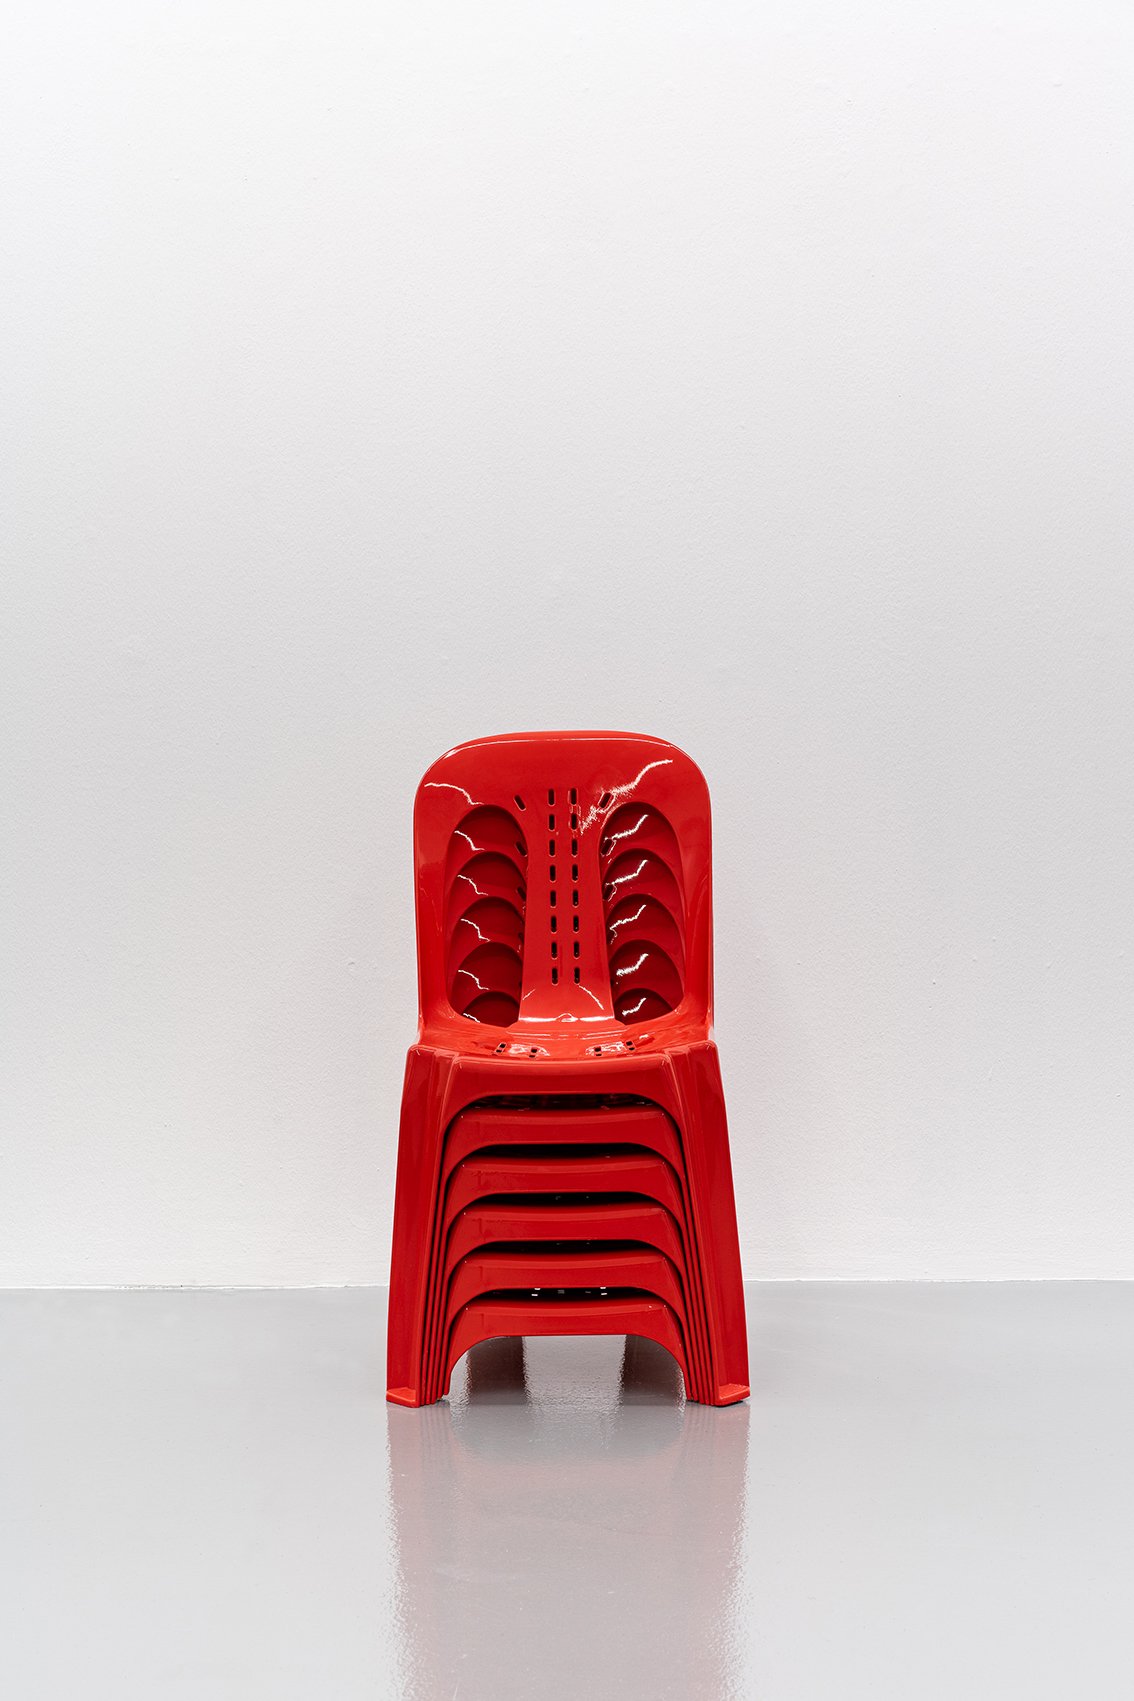  Kray CHEN  Between the Chair and the Butt #1 (Stack of 6 in Candy Red)  2020 Plastic chairs, automotive paint H80.5 x W45 x D49 cm (stacked) 